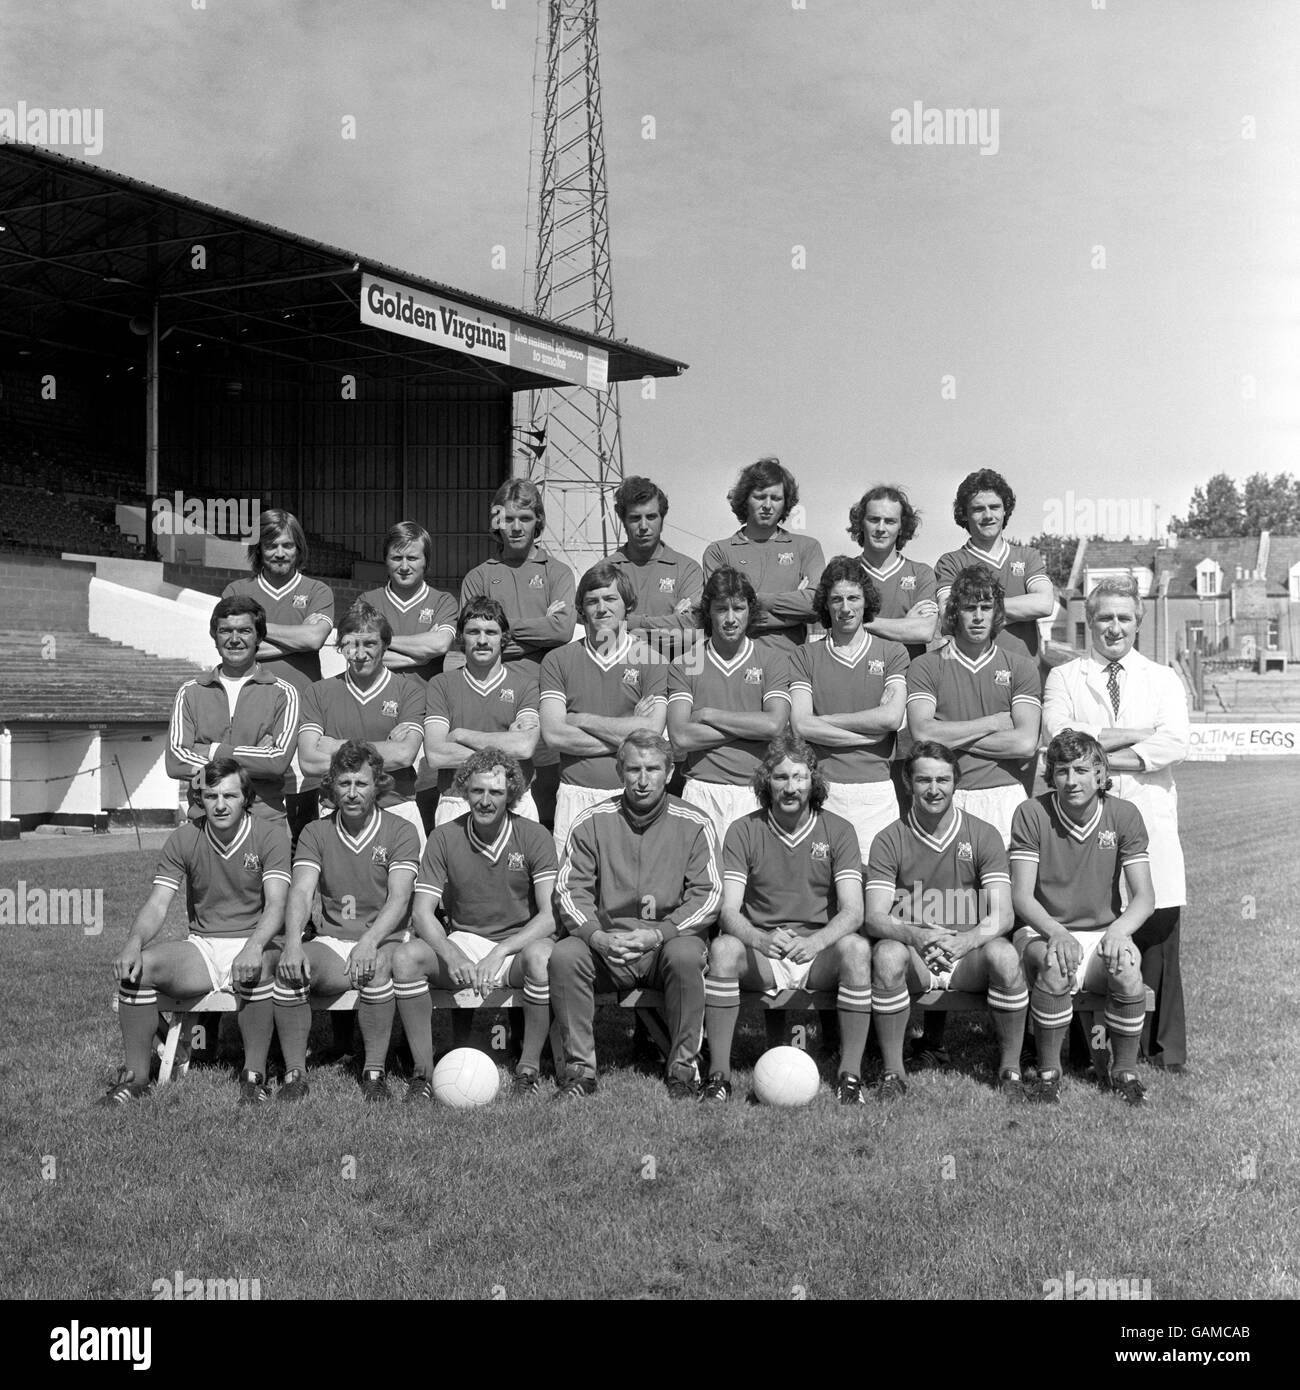 Bristol City football club, back row, from left: Keith Fear, Joe Durrell, Len Bond, Ray Cashley, John Shaw, Mike Brolly, and Clive Whitehead. Middle row, from left: Ken Wimshurst (coach), John Emanuel, Donnie Gillies, David Rodgers, gary Collier, Tom Ritchie, Paul Cheesley and Les Bardsley (physiotherapist). Front row, from left: Trevor Tainton, Brian Drysdale, Geoff Merrick, Alan Dicks (manager) Gerry Gow, Gerry Sweeney, and Jimmy Mann. Stock Photo